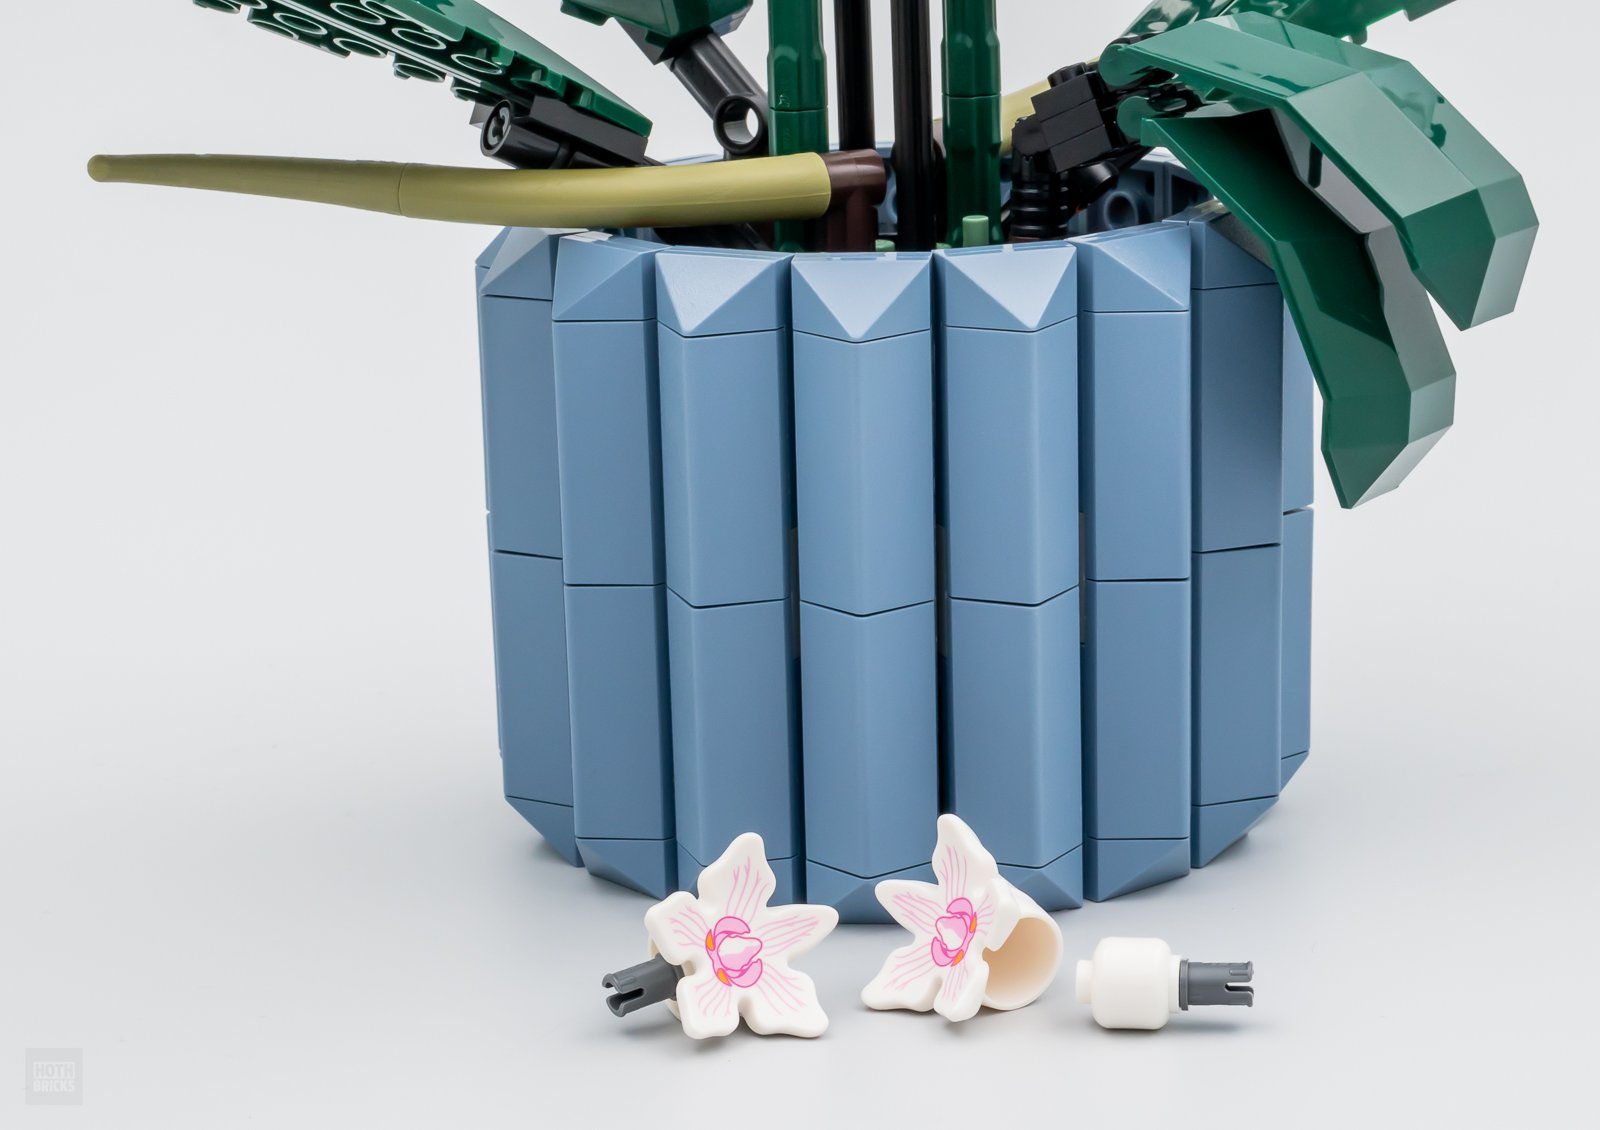 LEGO 10311 Orchid review